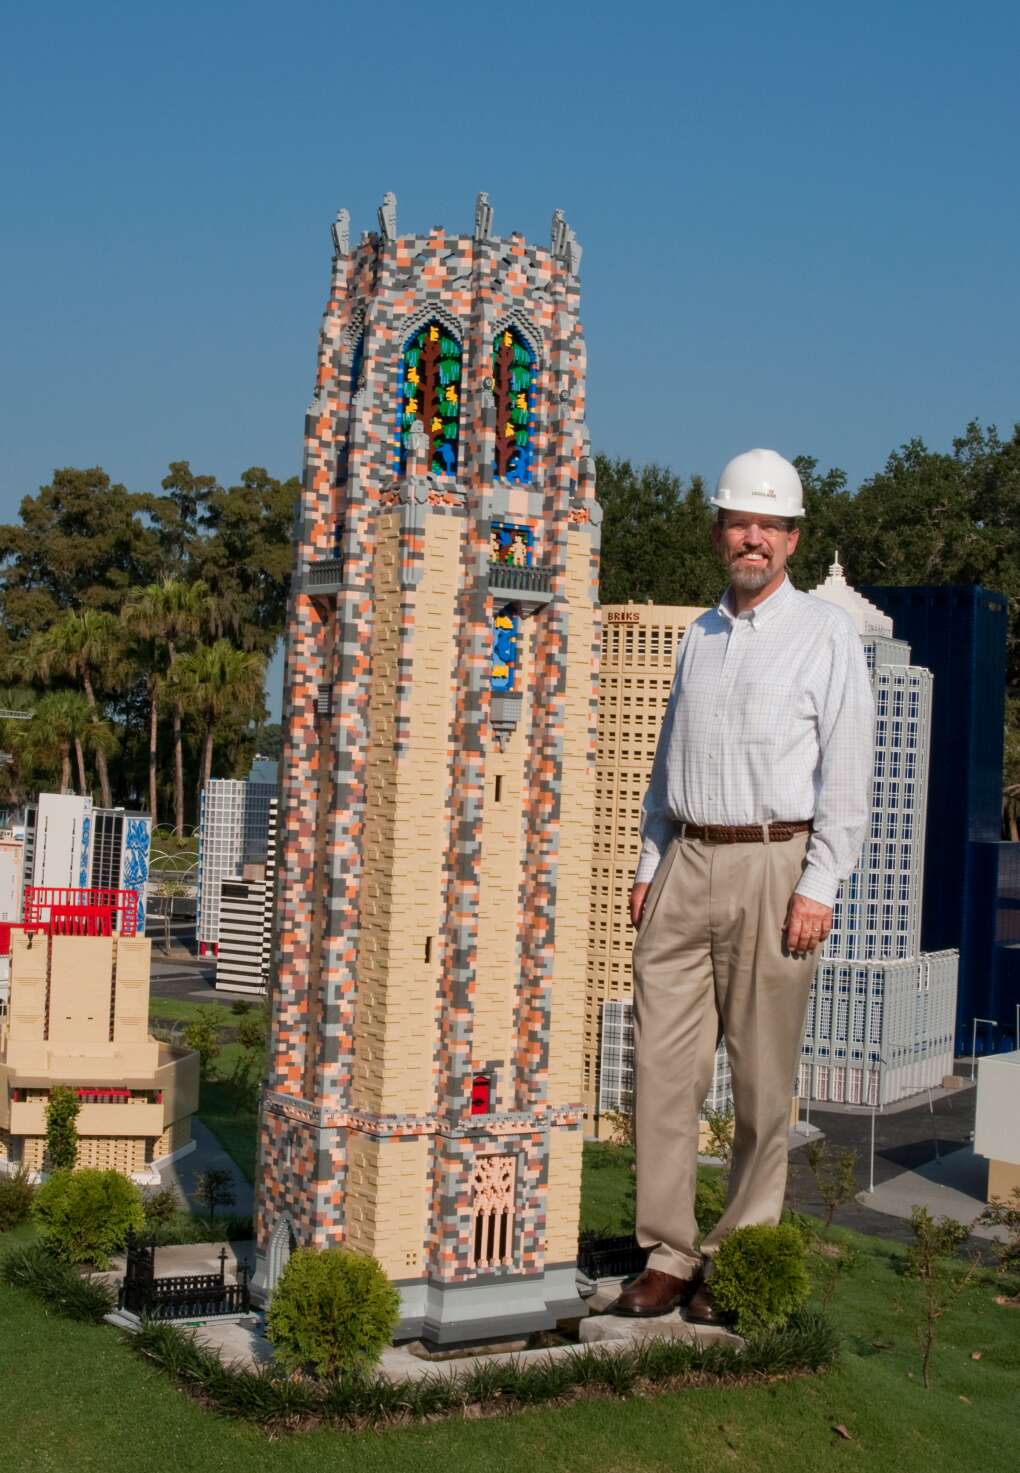 David Price stands with Legoland's replica of the Bok bell tower.